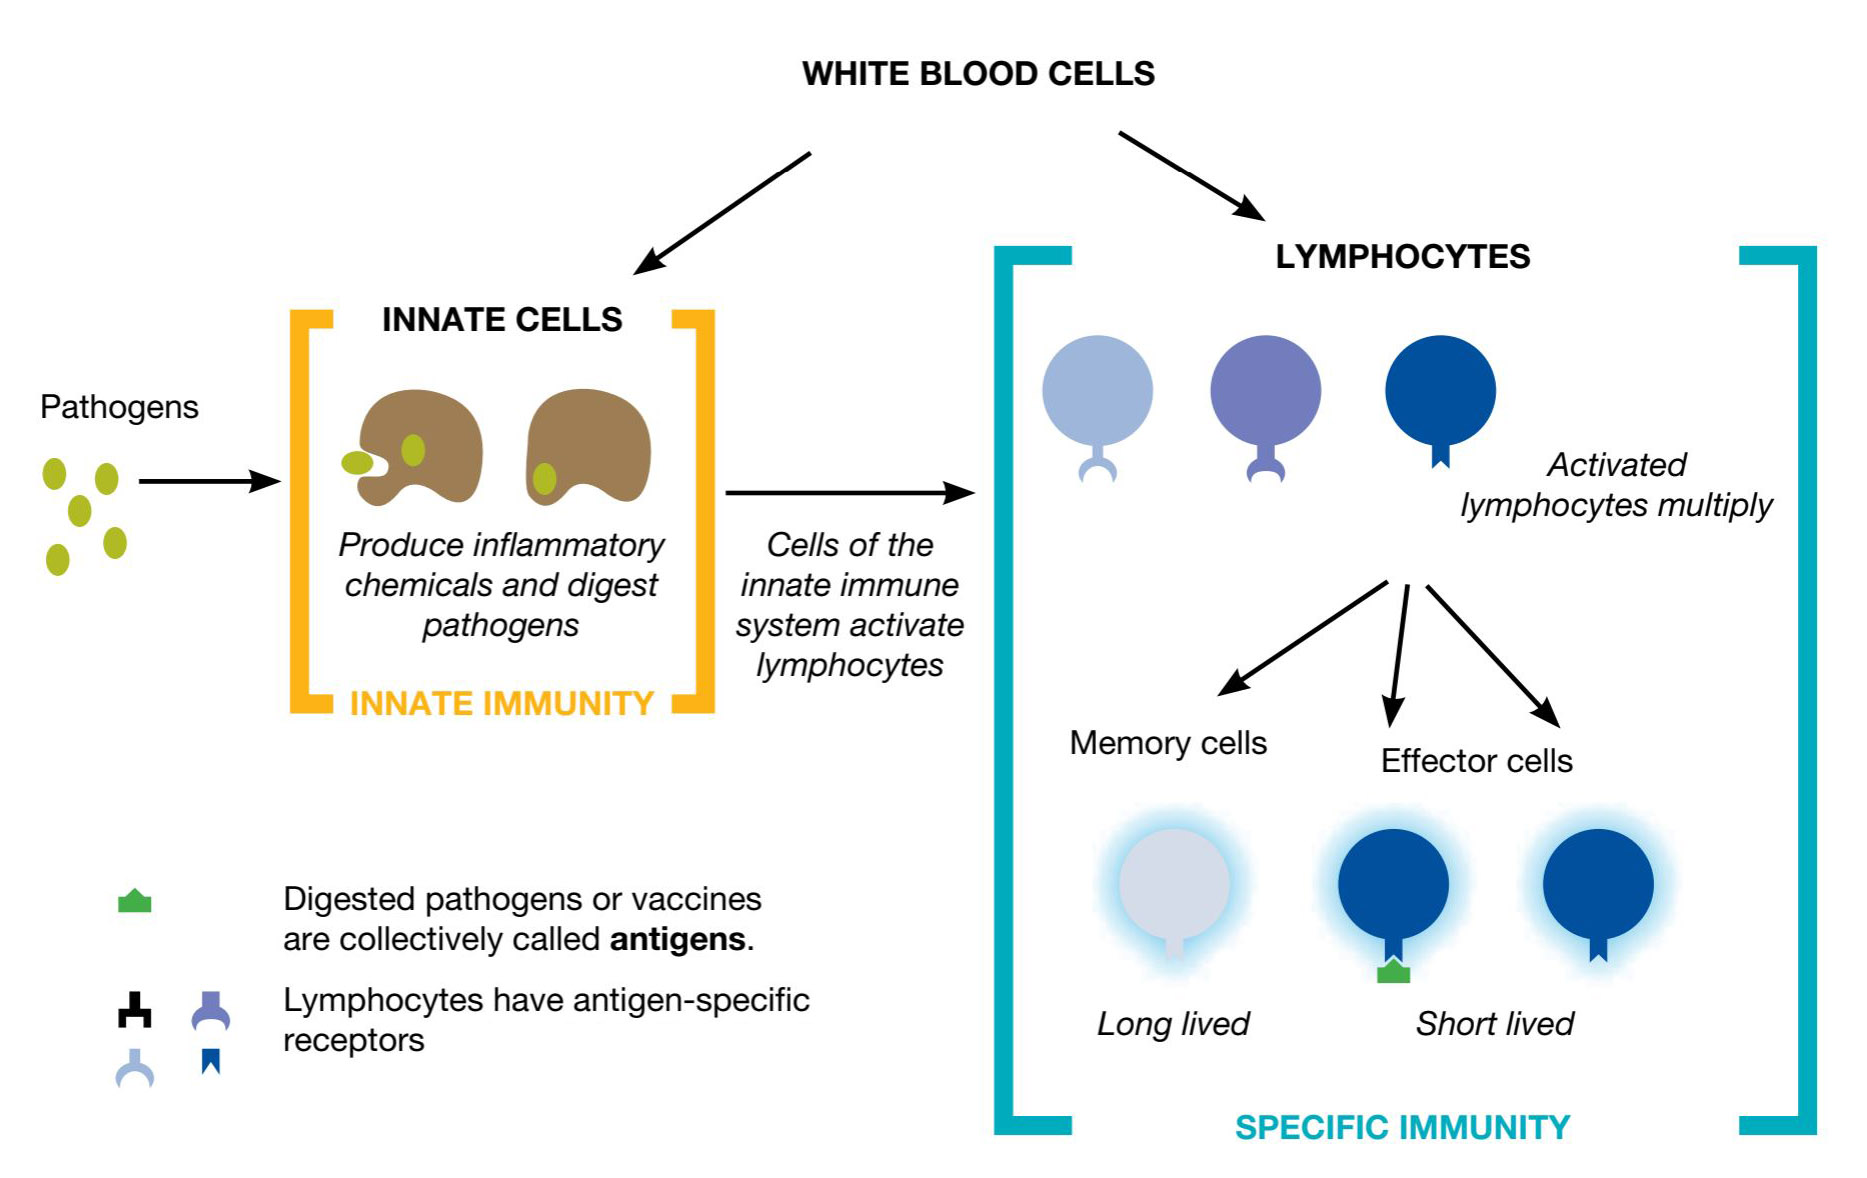 A diagram showing how white blood cells respond to infections